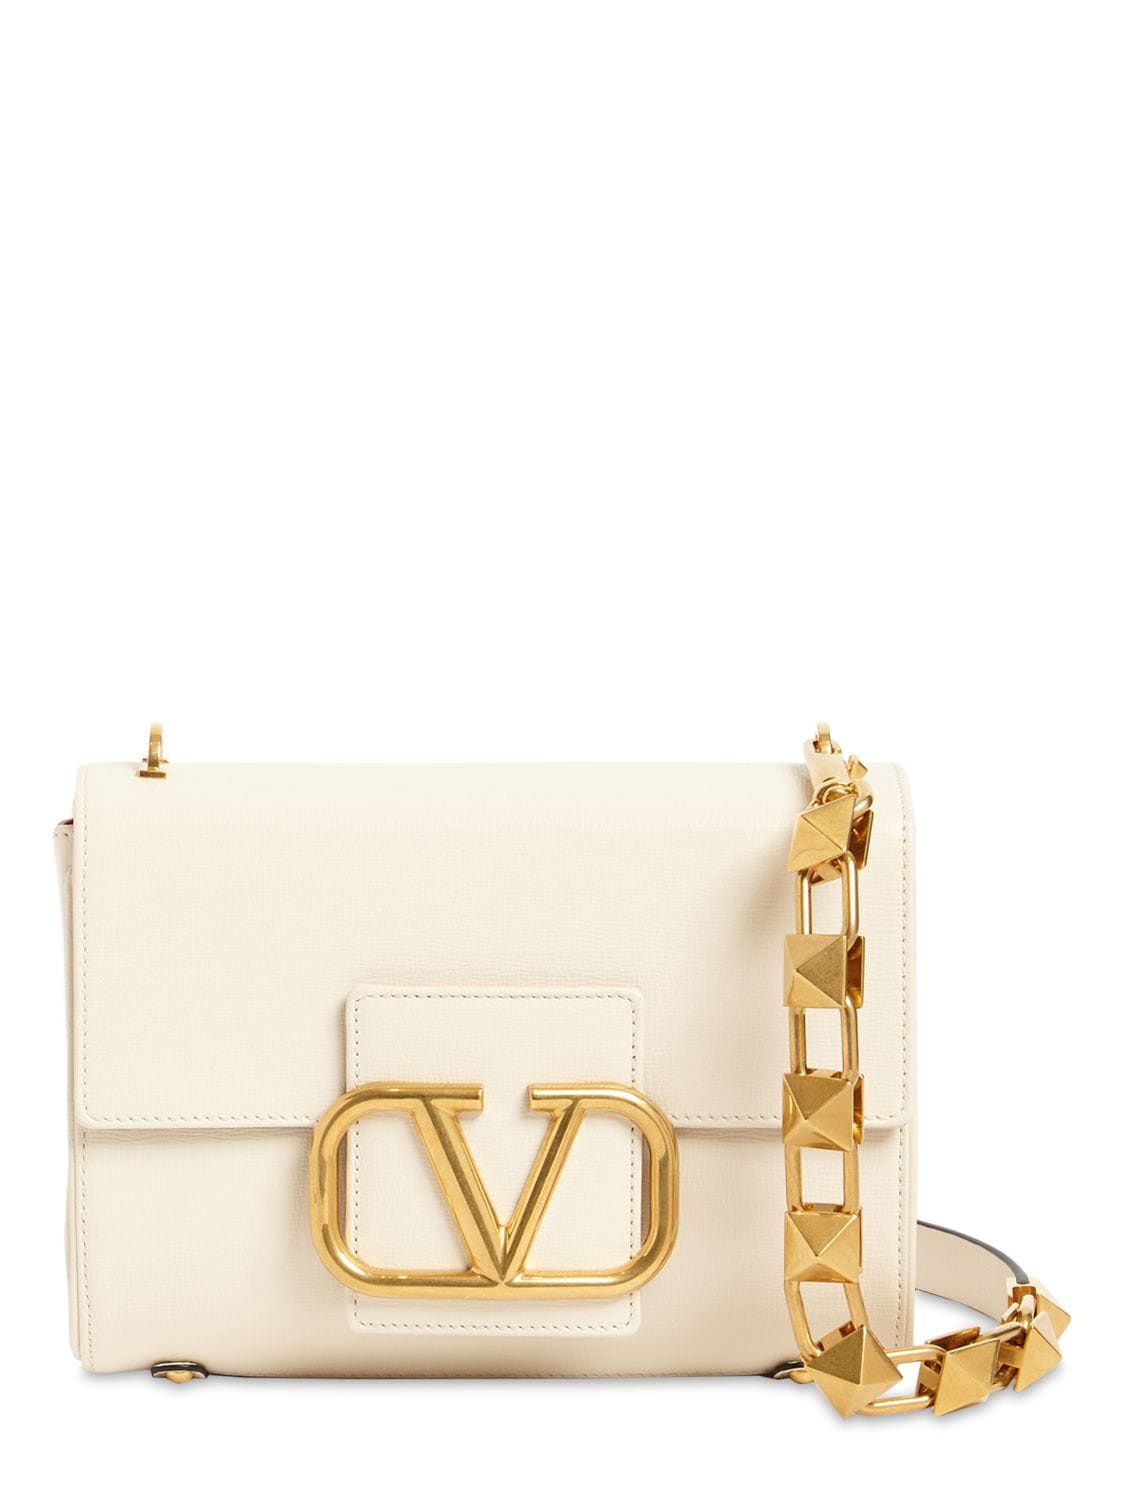 Valentino Vsling Small Grainy Leather Wallet On Chain Women's